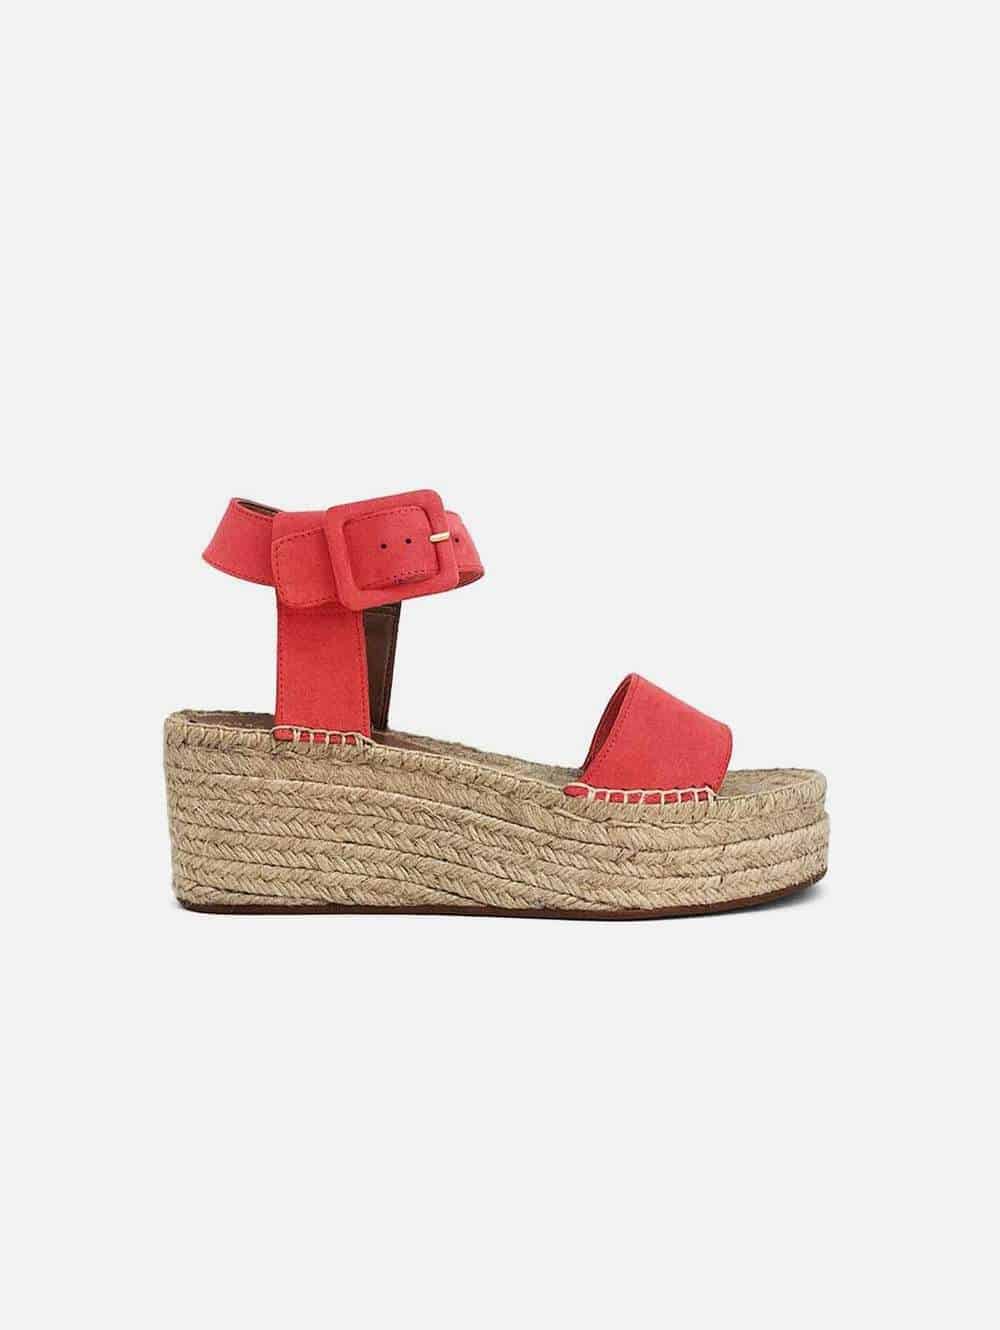 Platform shoes with coral straps and jute soles